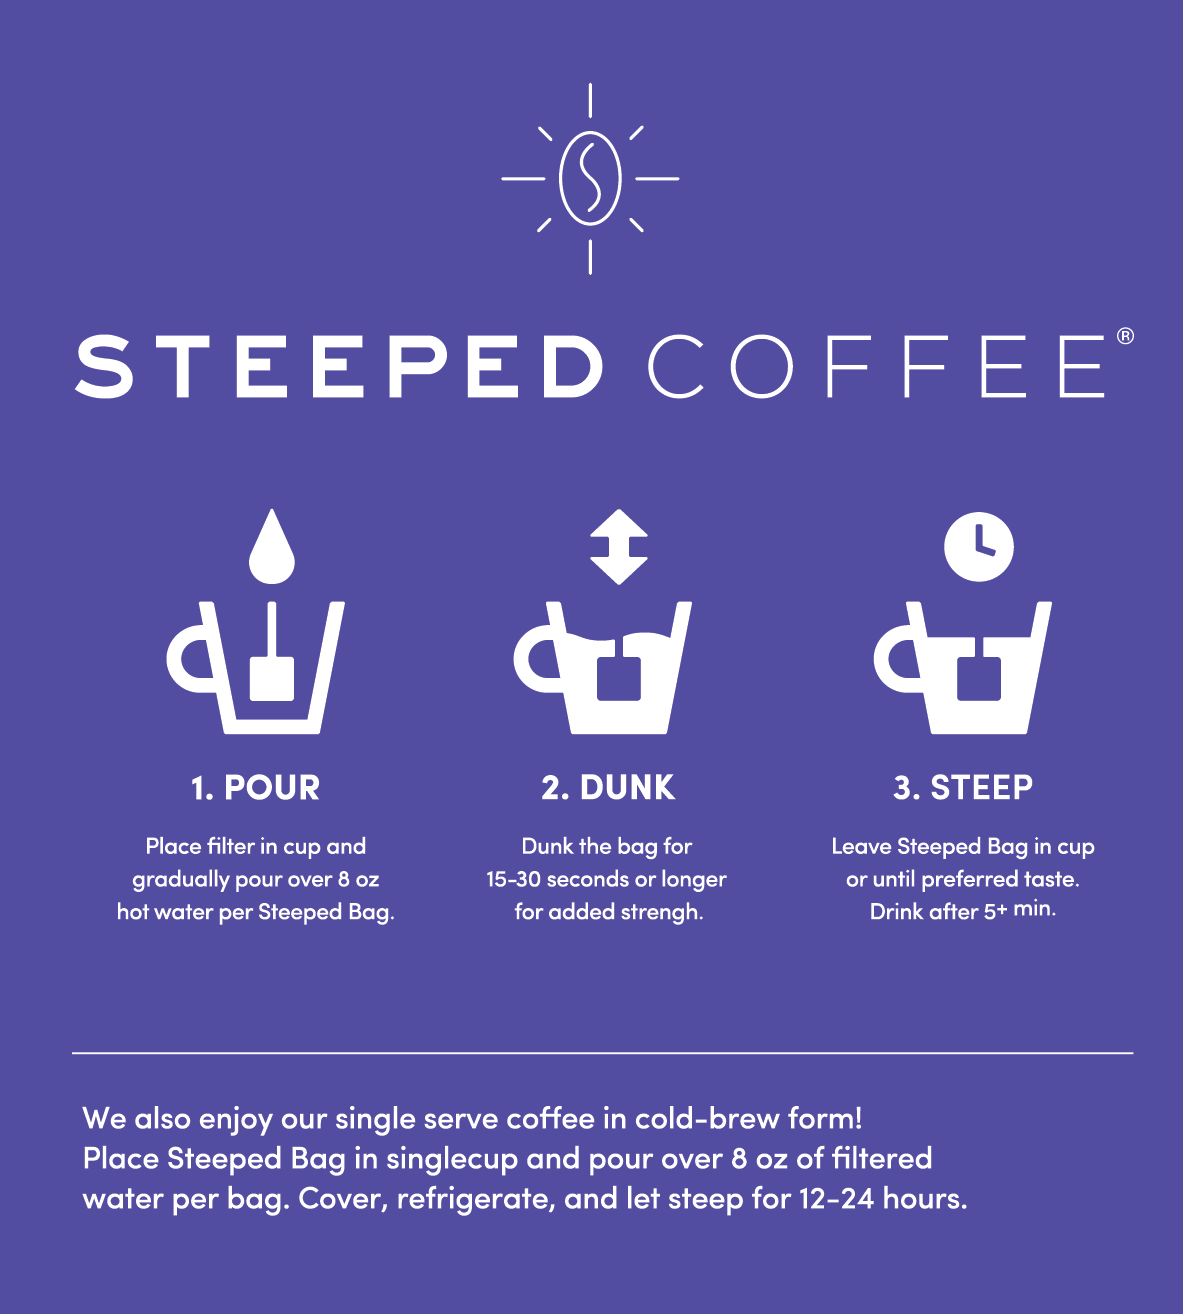 Startup Steeped Coffee Has SingleServe In the Bag  Daily Coffee News by  Roast MagazineDaily Coffee News by Roast Magazine